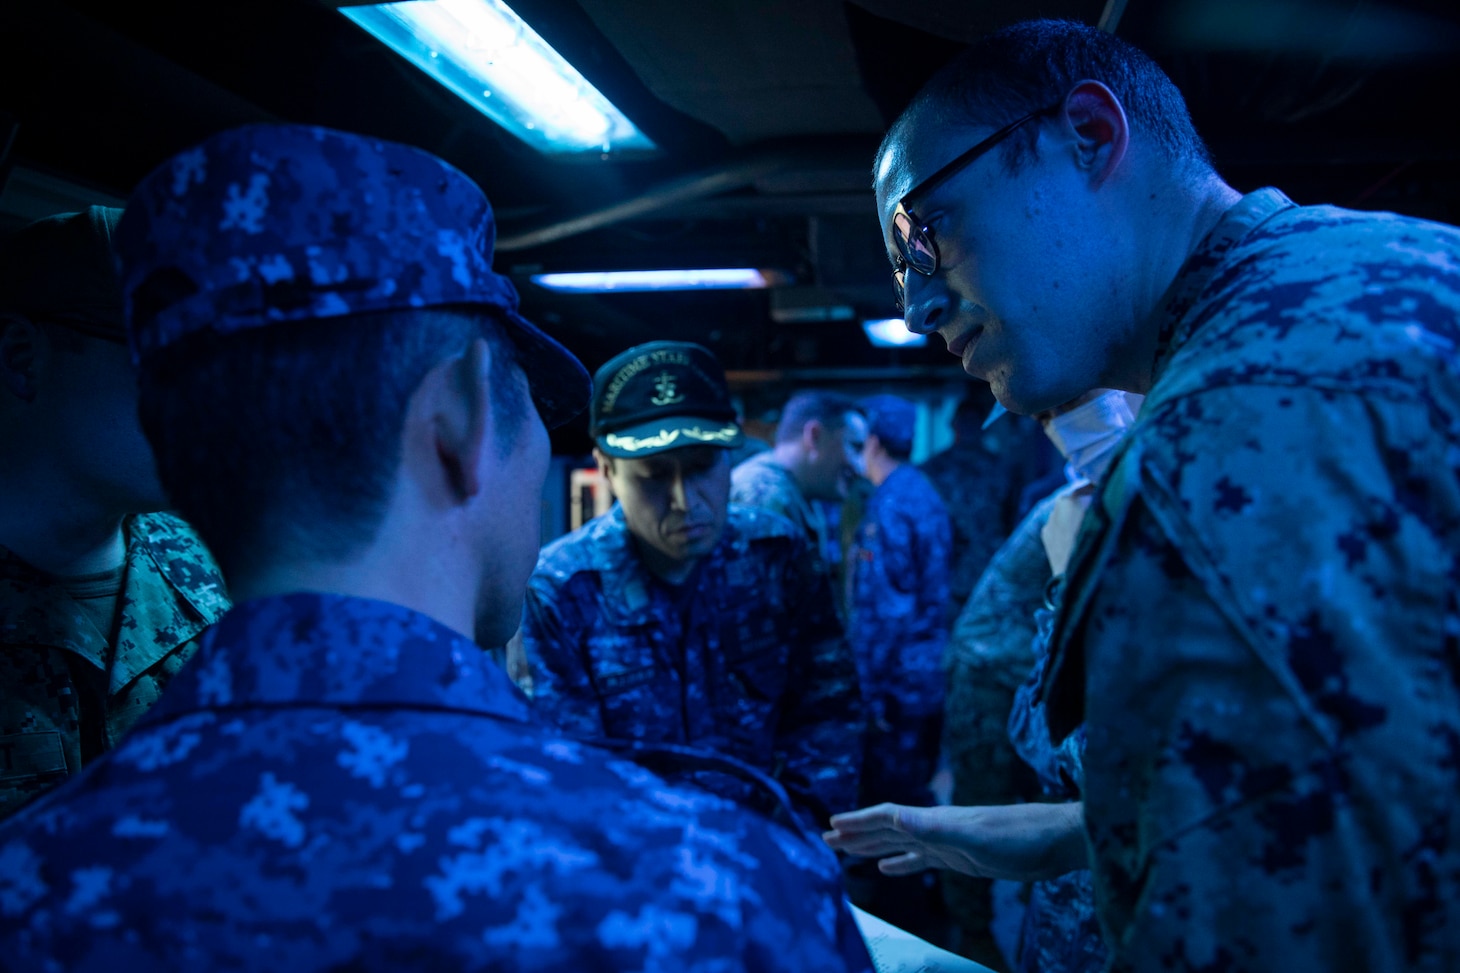 240328-N-SF508-1482 YOKOSUKA, Japan (March 28, 2024) Ensign Simmon McGahey, assigned to the Arleigh Burke-class guided-missile destroyer USS McCampbell (DDG 85), explains tomahawk land attack missile (TLAM) procedures to members of the Japan Maritime Self-Defense Force during TLAM training aboard McCampbell at Commander, Fleet Activities Yokosuka, March 28. U.S. 7th Fleet is the U.S. Navy's largest forward-deployed numbered fleet, and routinely interacts and operates with allies and partners in preserving a free and open Indo-Pacific region. (U.S. Navy Photo by Mass Communication Specialist 1st Class Charles Oki)